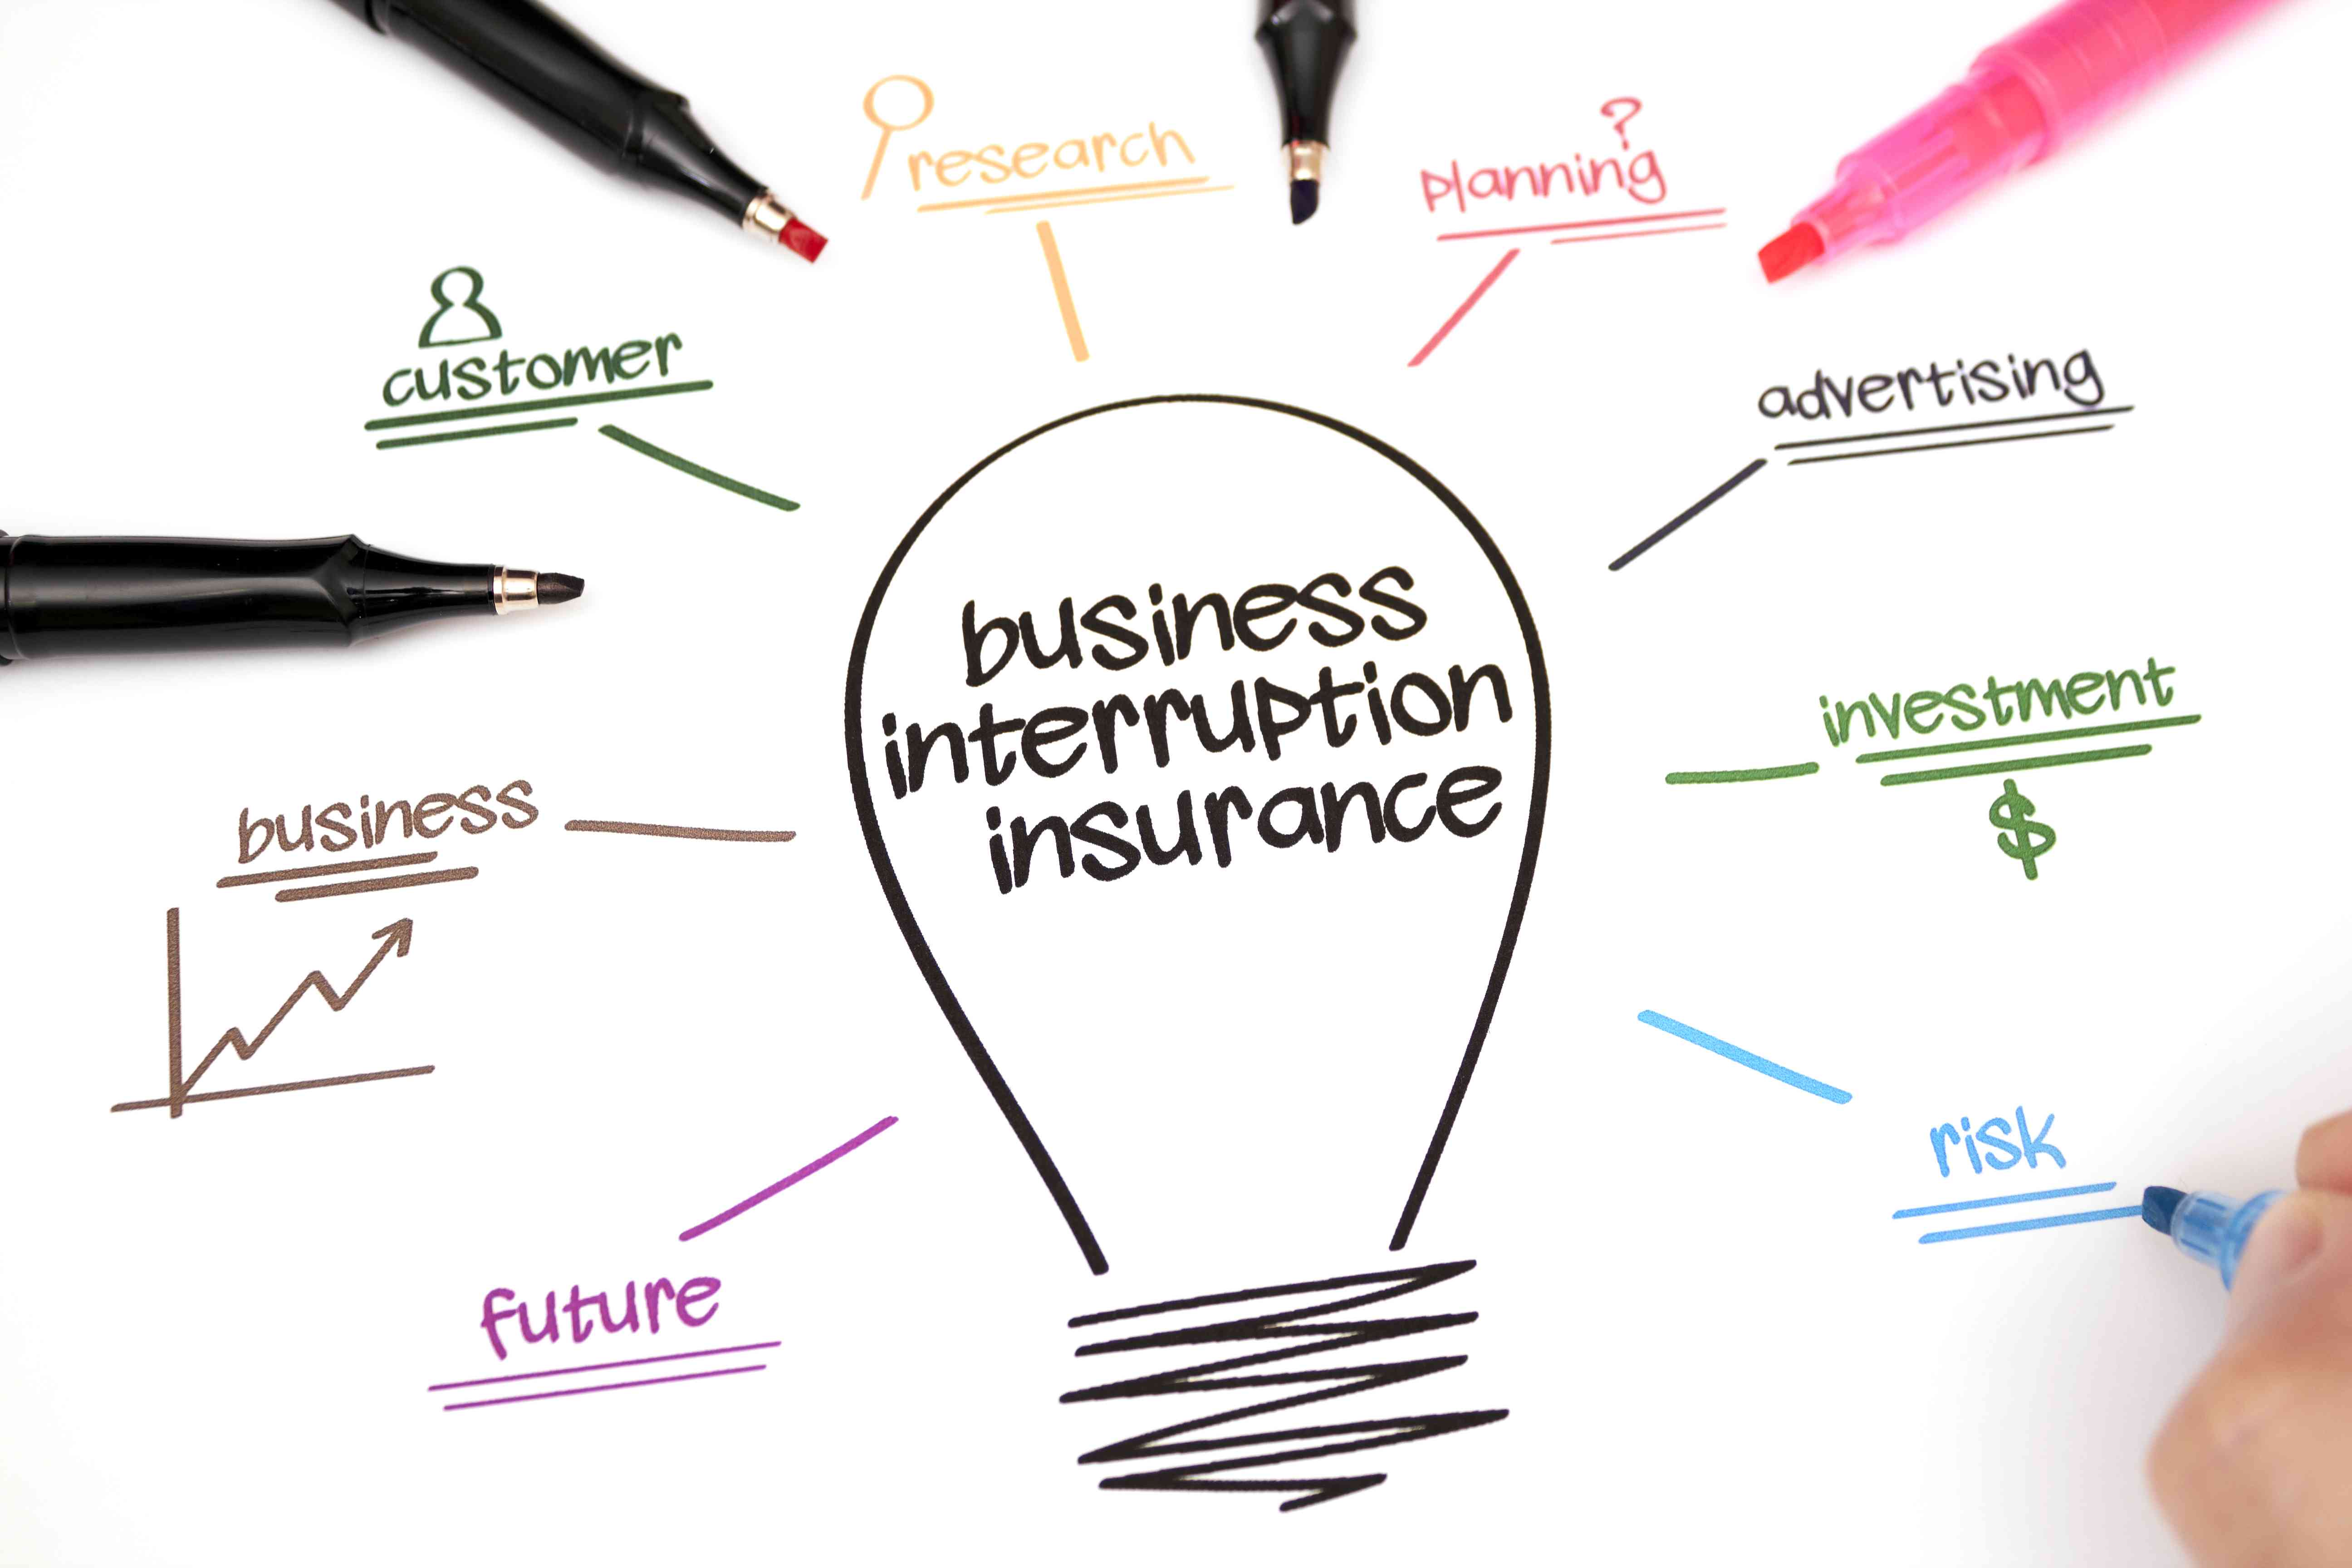 is business income the same as business interruption? 2